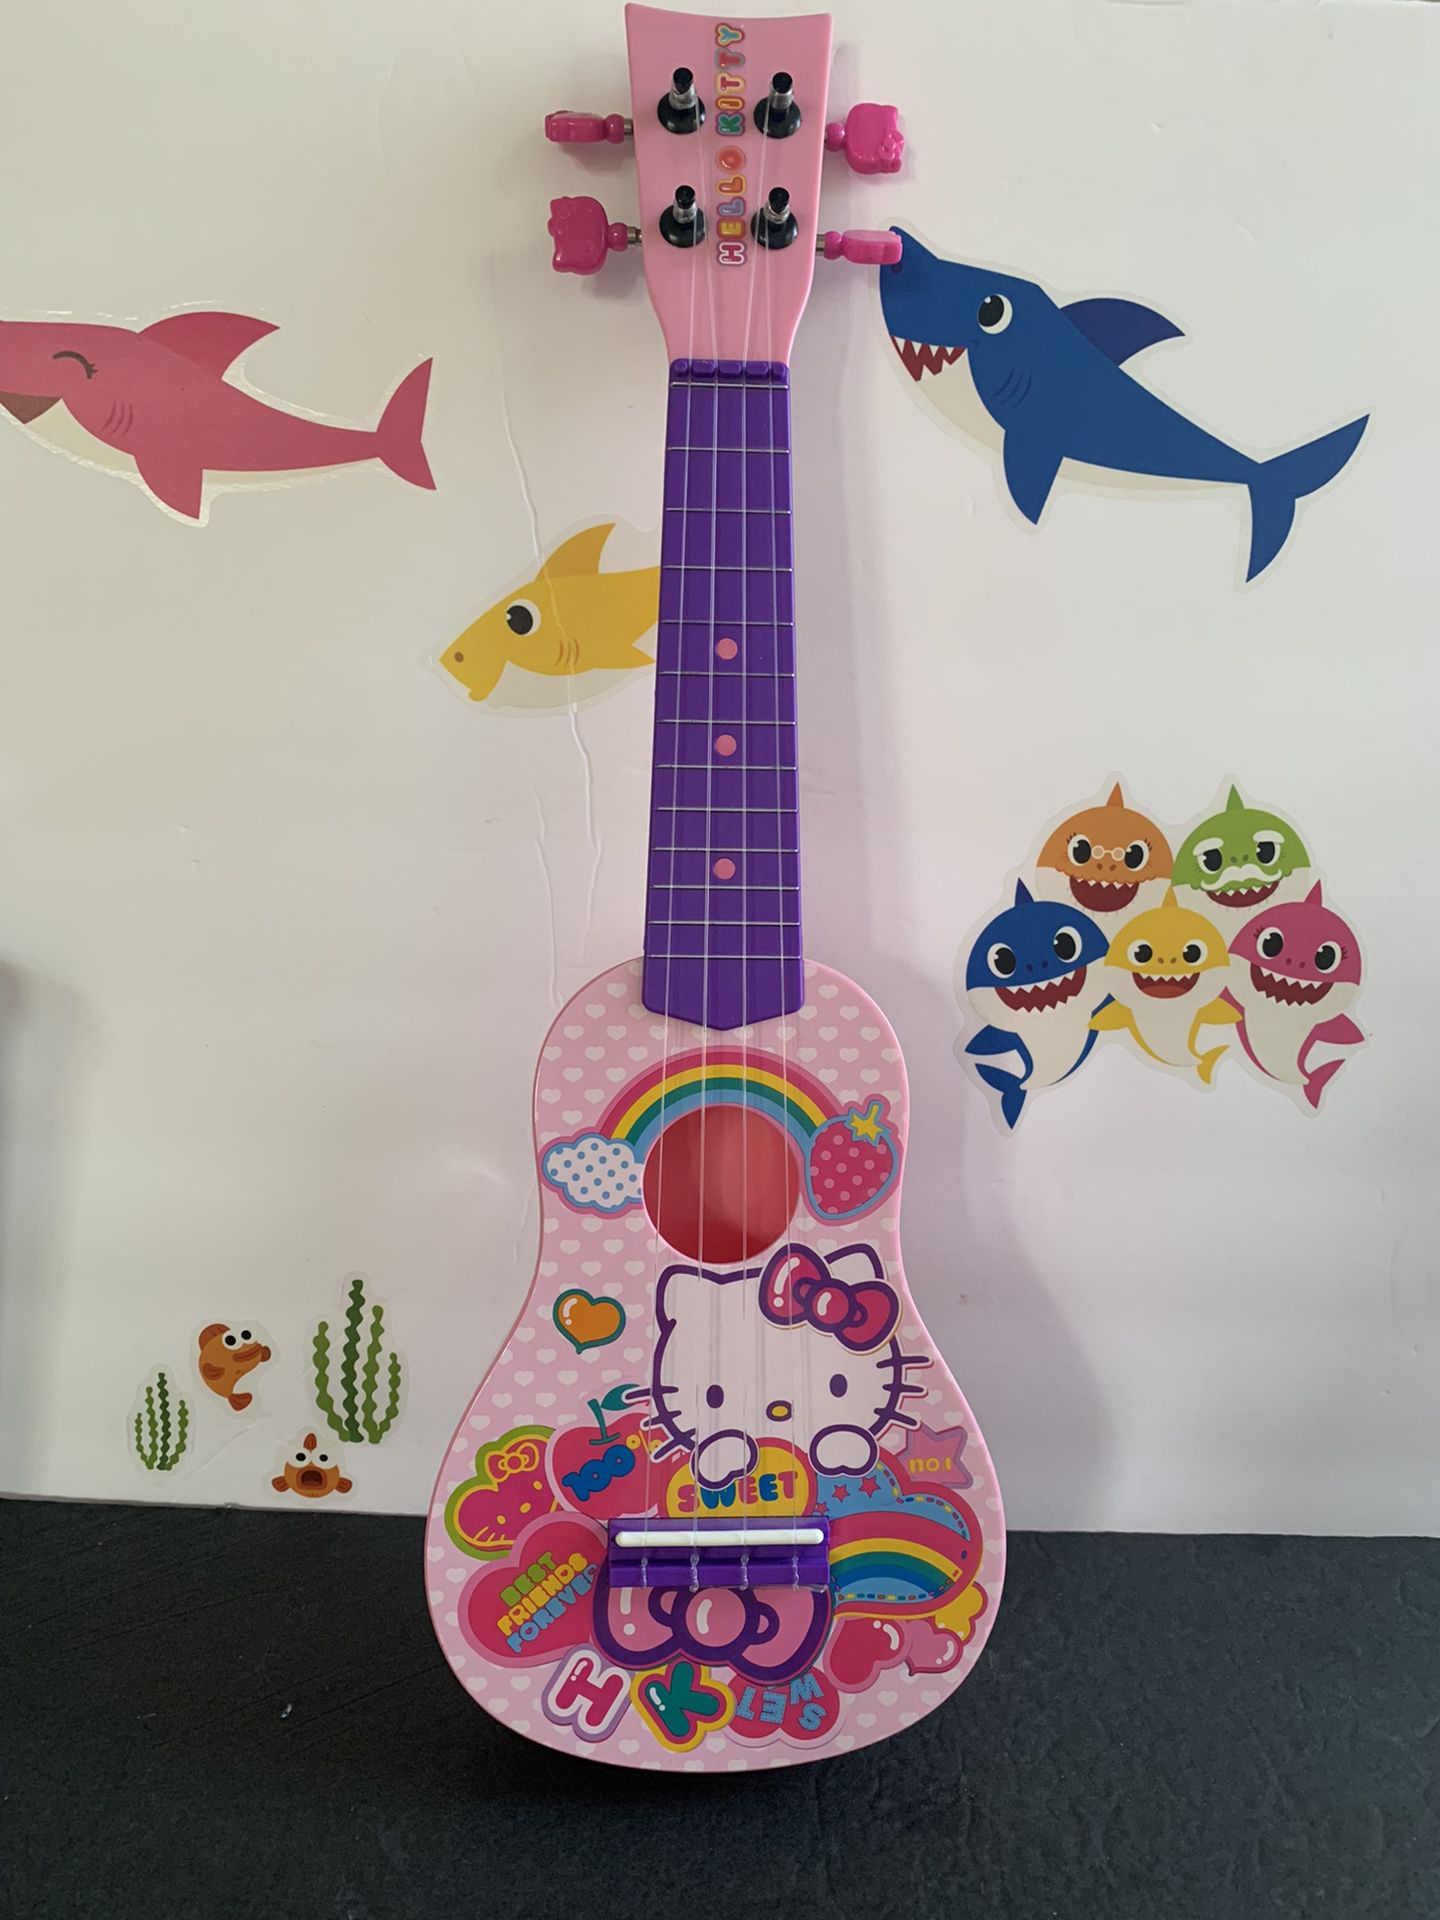 HELLO KITTY ACOUSTIC GUITAR FOR KIDS! 20 INCHES! Excellent Condition 